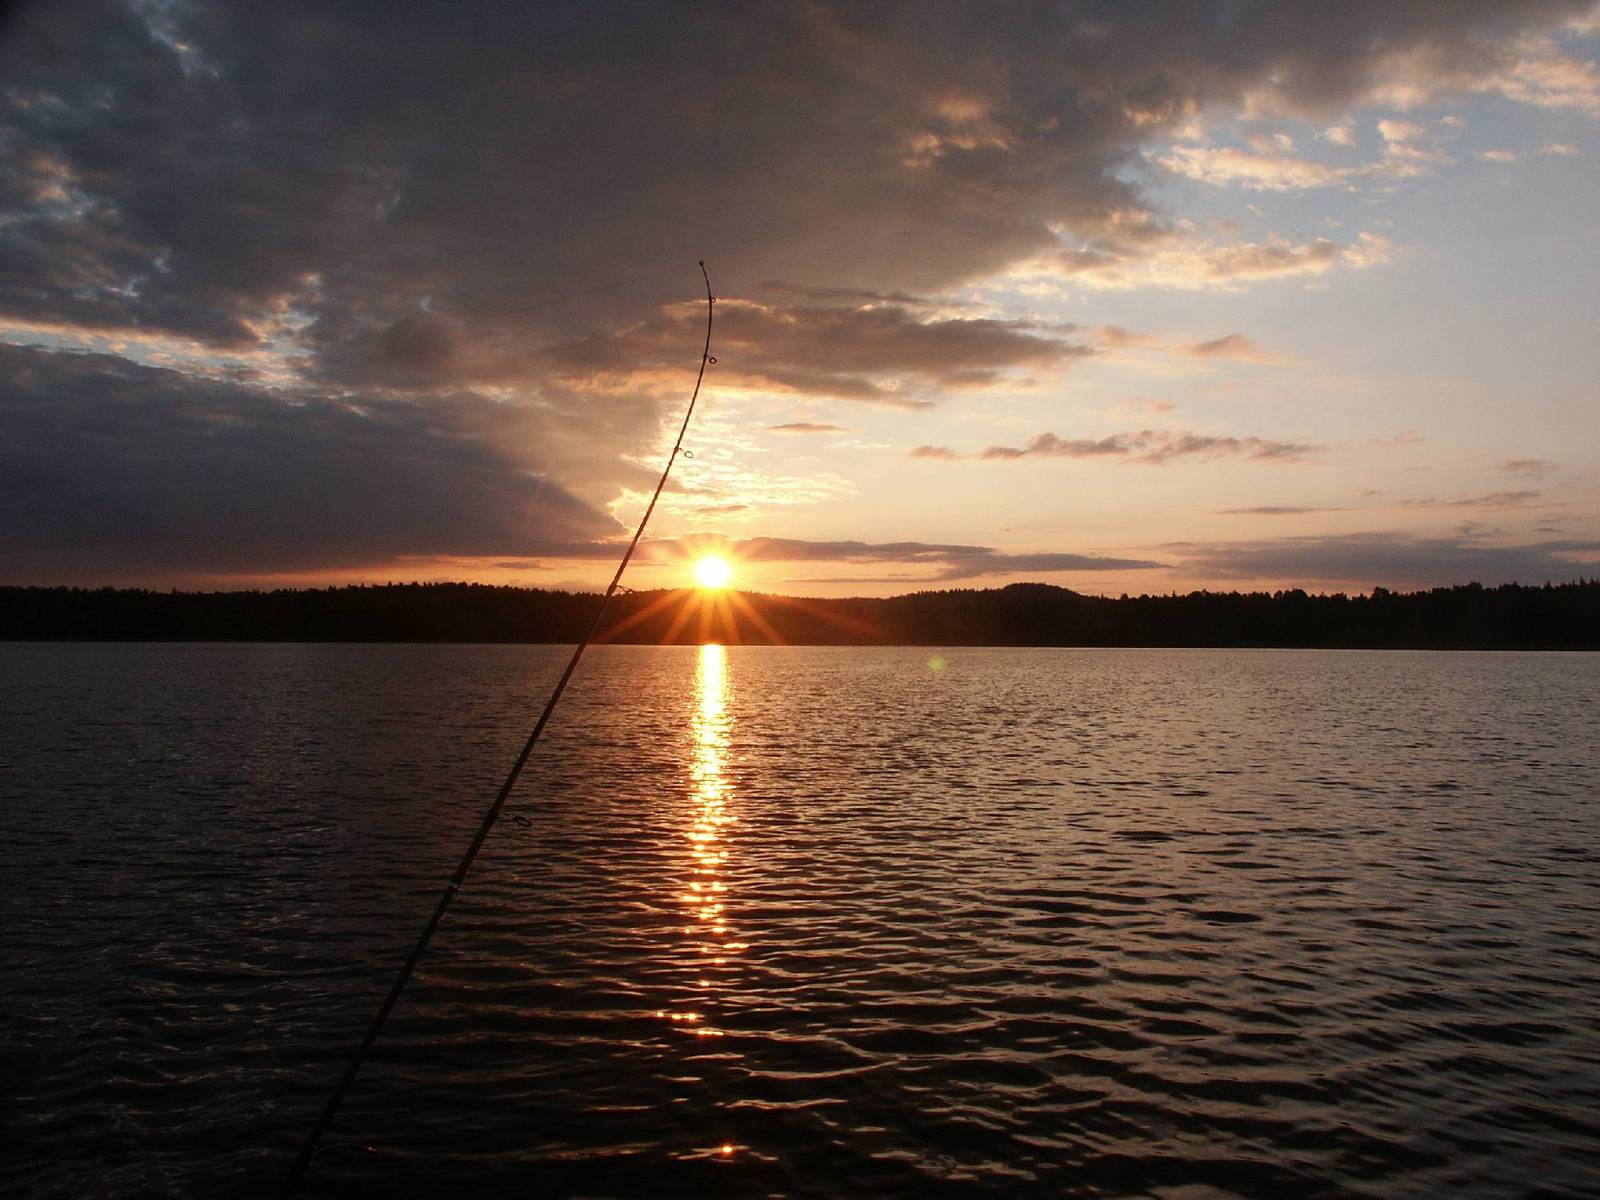 the sun is setting over a lake and there is a fishing pole